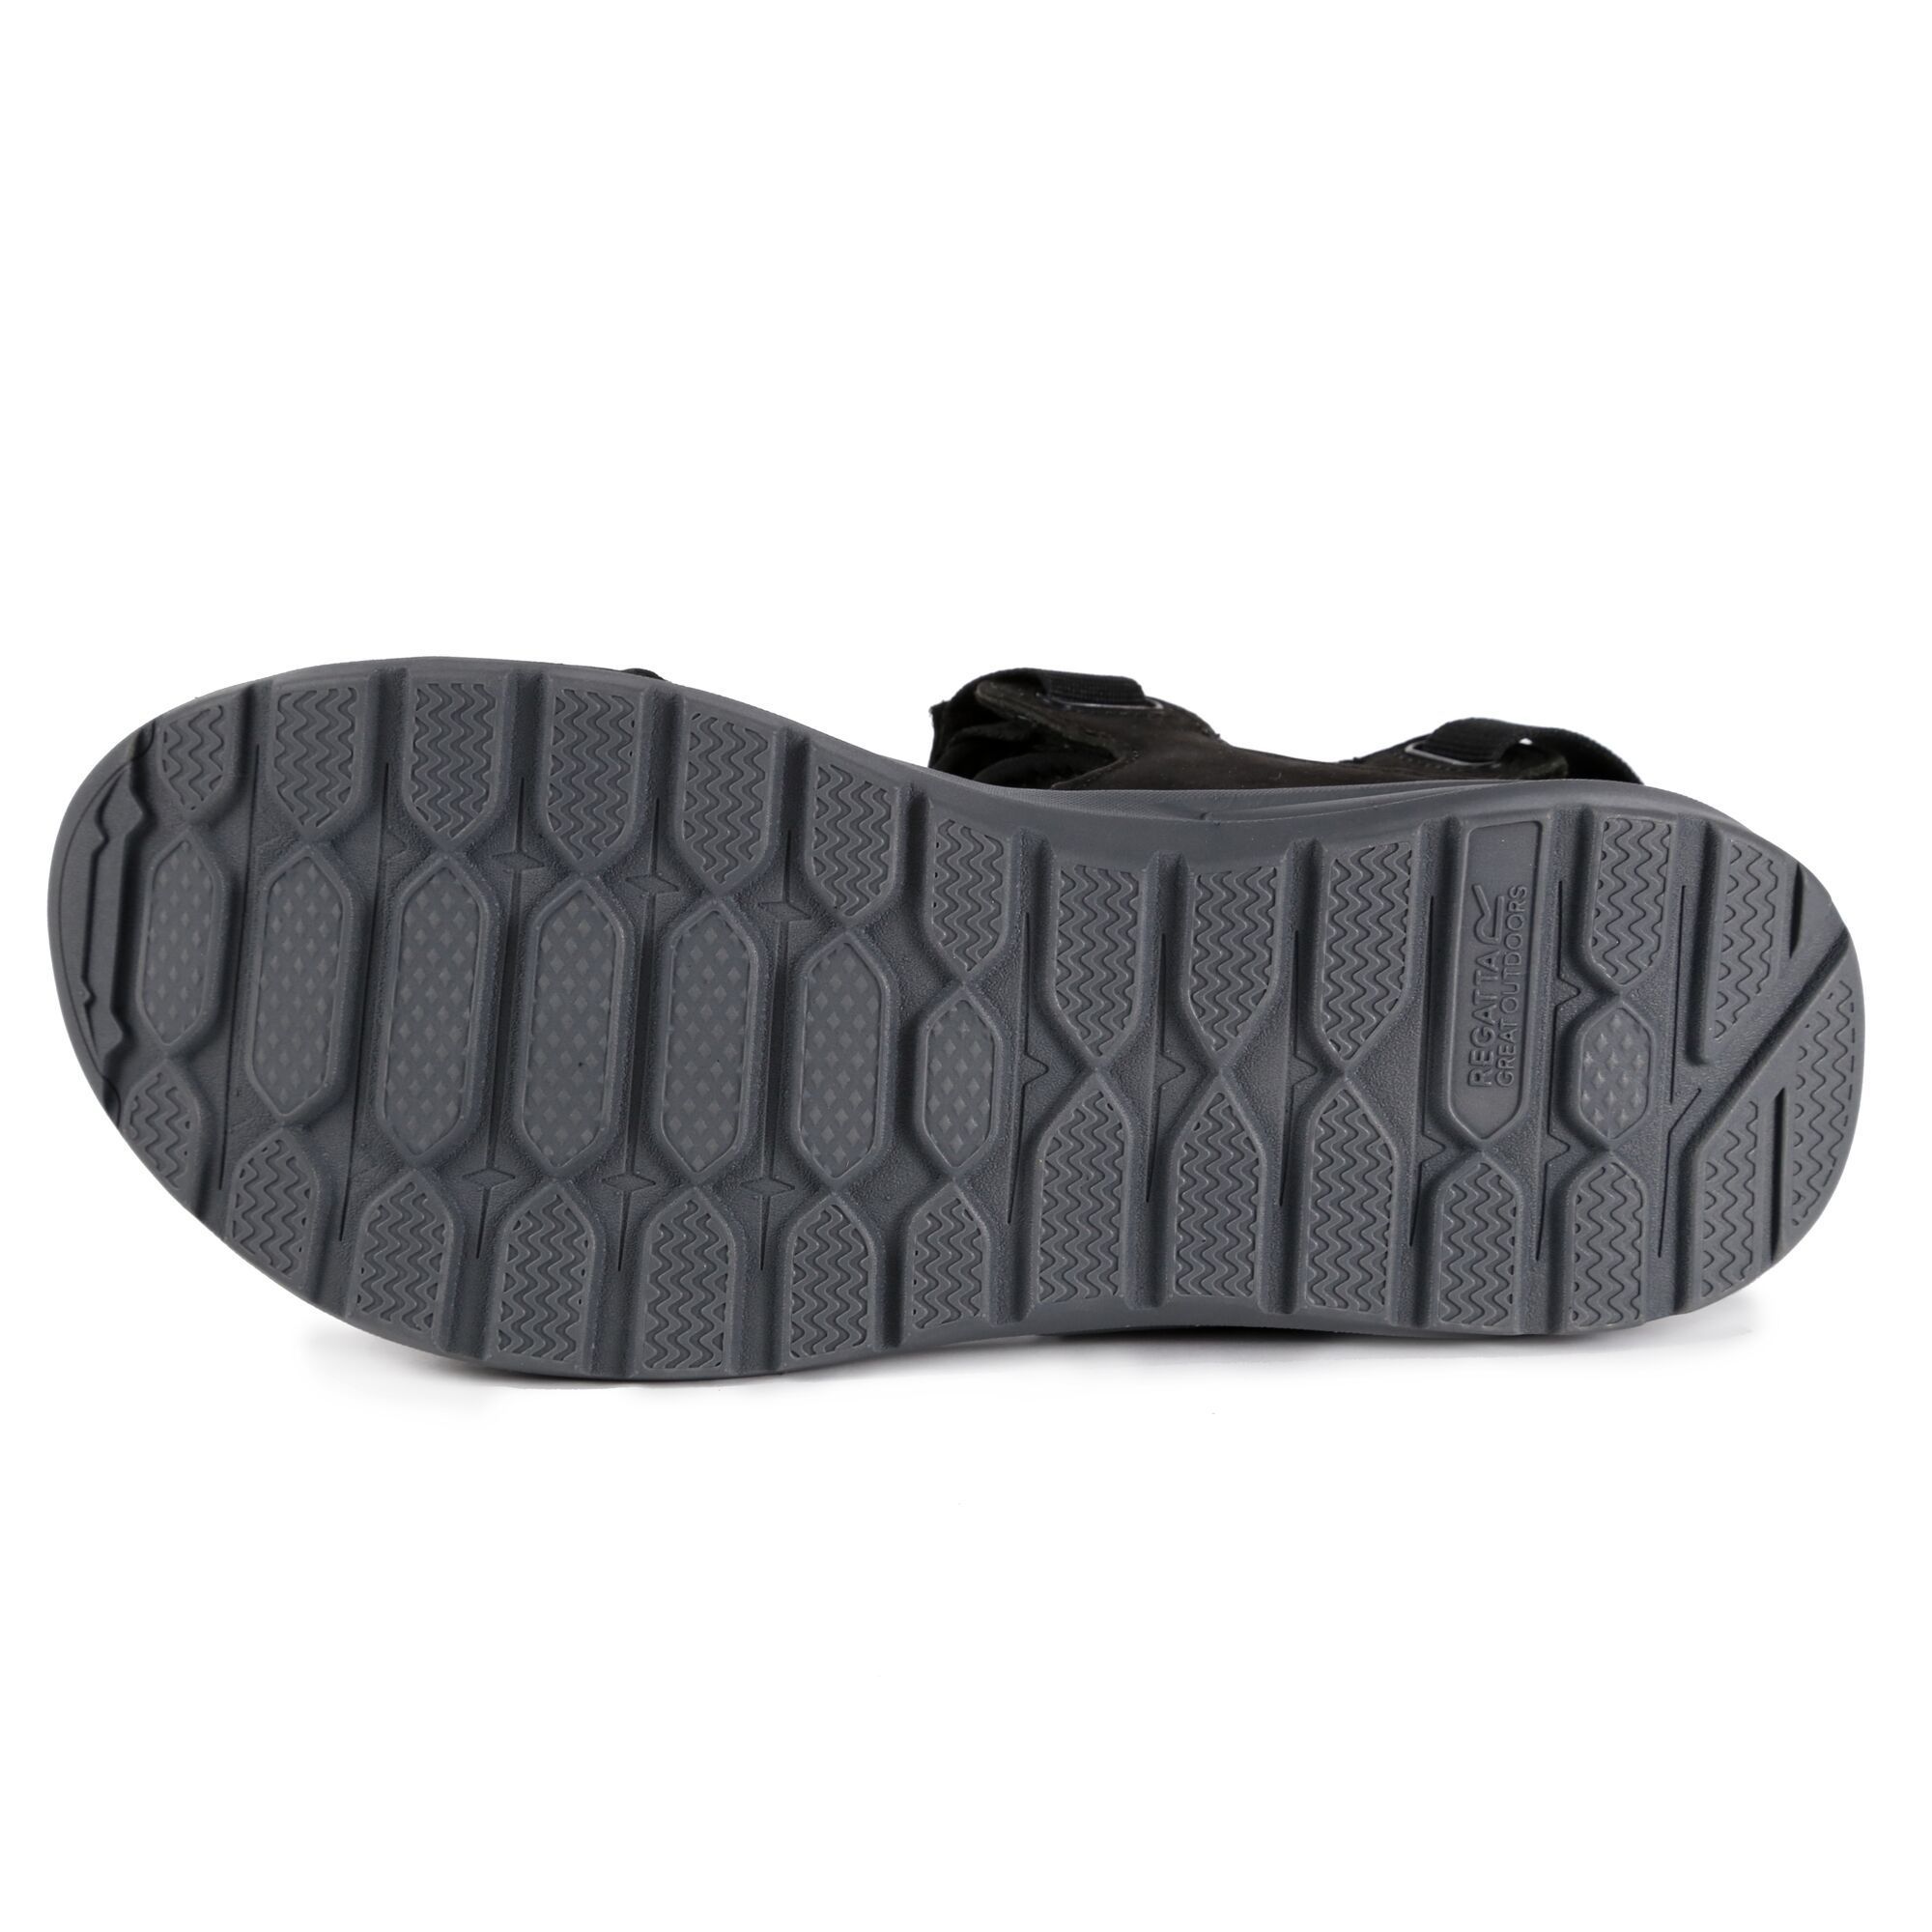 Textile material: 85% leather, 15% polyester. Leather upper with neoprene backing for comfort and protection. 3 points of adjustment for versatile fit. Adjustable removable heel strap. Can be converted into a slide sandal. Shock absorbing compression moulded EVA footbed. New XLT sole unit provides flexible and lightweight underfoot comfort.